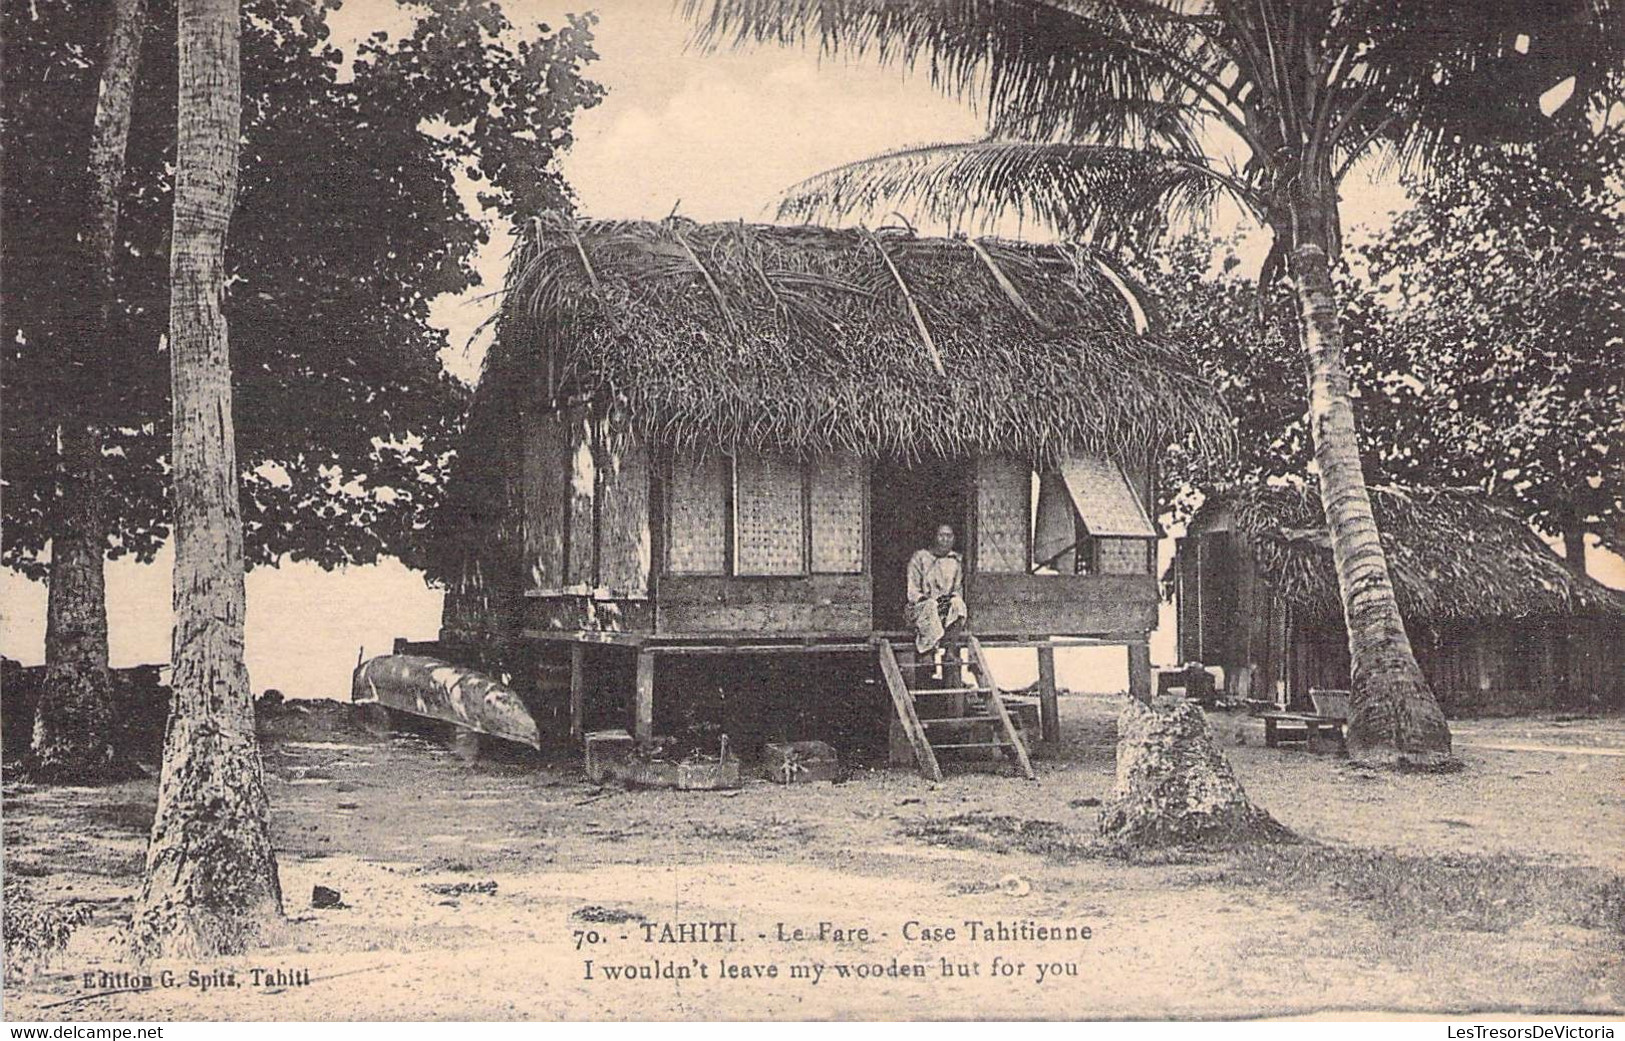 Tahiti - Le Fare - Case Tahitienne - Edit. G. Spits - I Wouldn't Leave My Wooden But For You - Carte Postale Ancienne - Tahiti